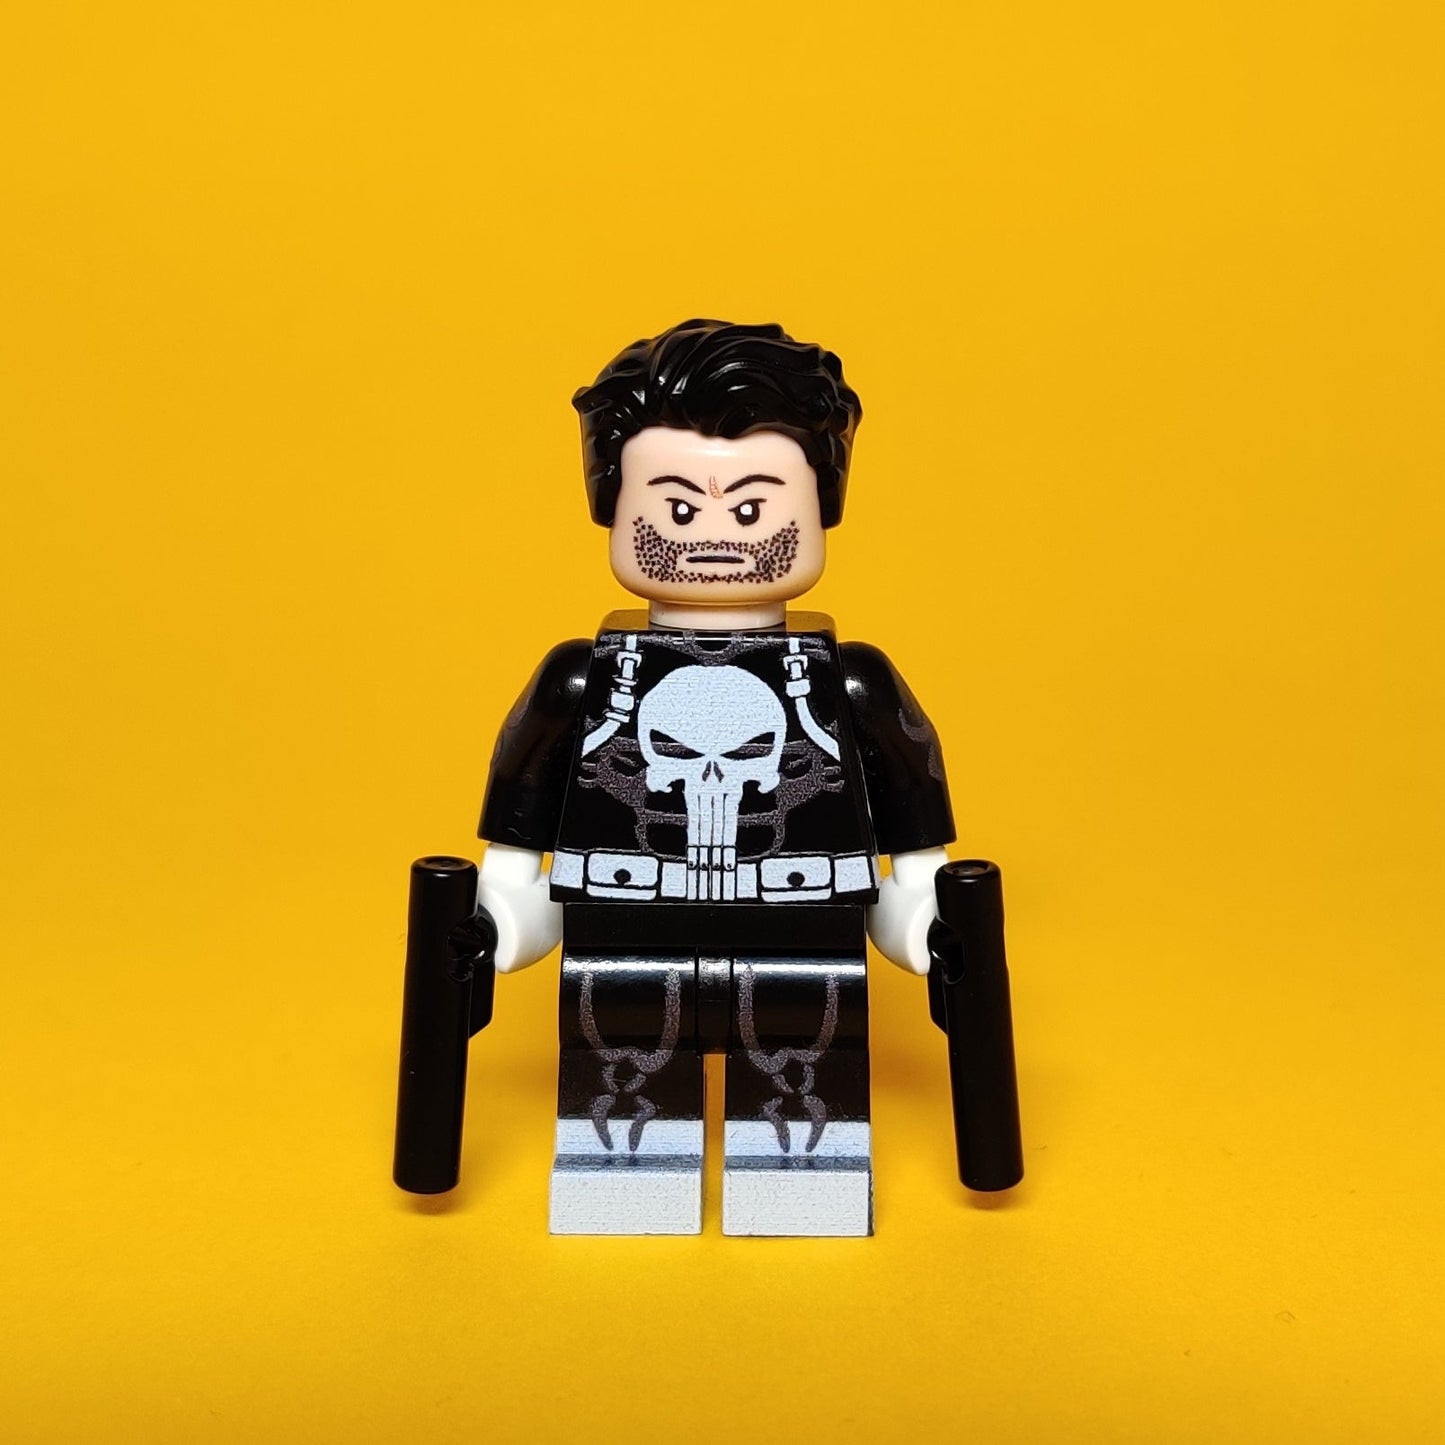 Exclusive Printed Minifigure A figure with unique,stunning design that can be found only in our store.